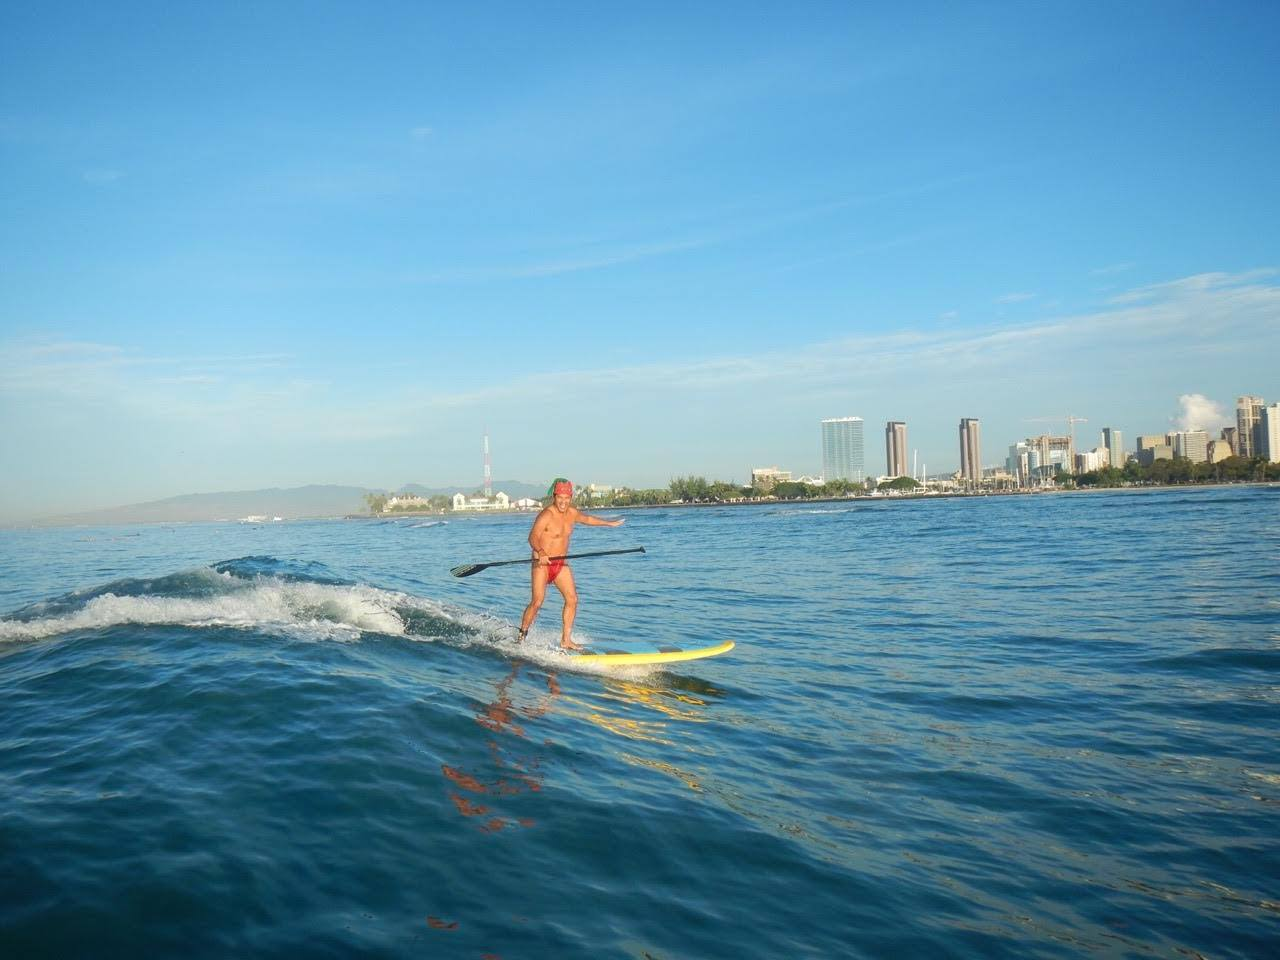 inflatable stand up paddle board is a board inflated with air